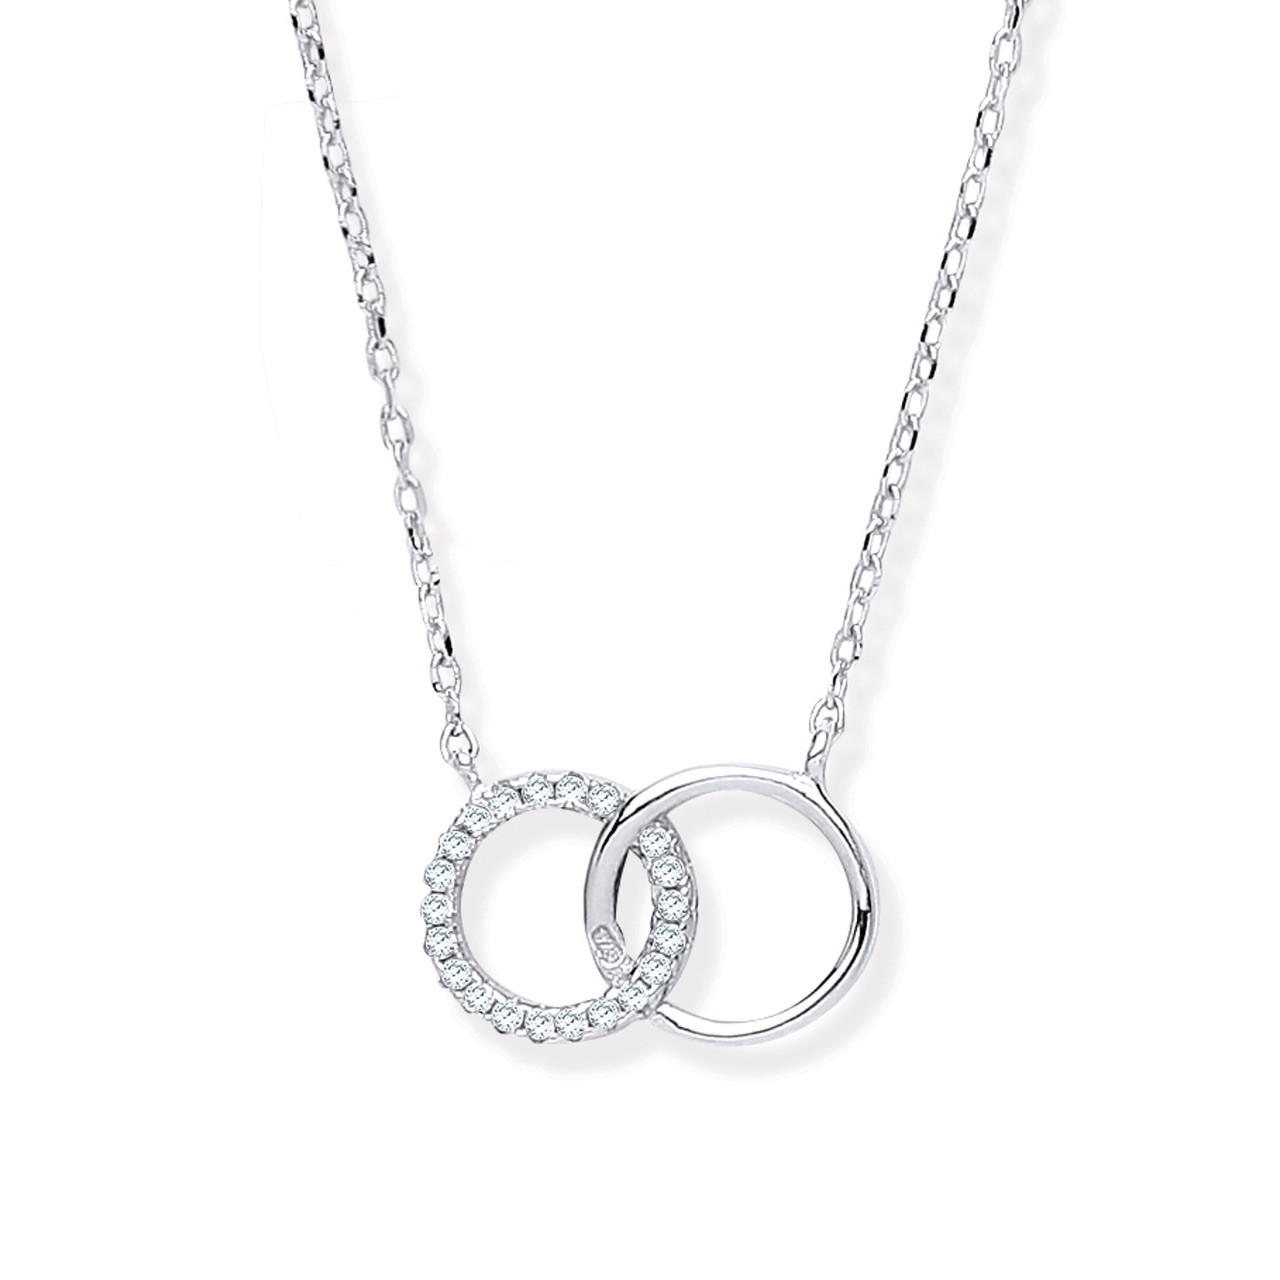 Two Circle Necklace, 2 Sisters Necklace, 2 Children, Best Friends Gift,  Sterling Silver